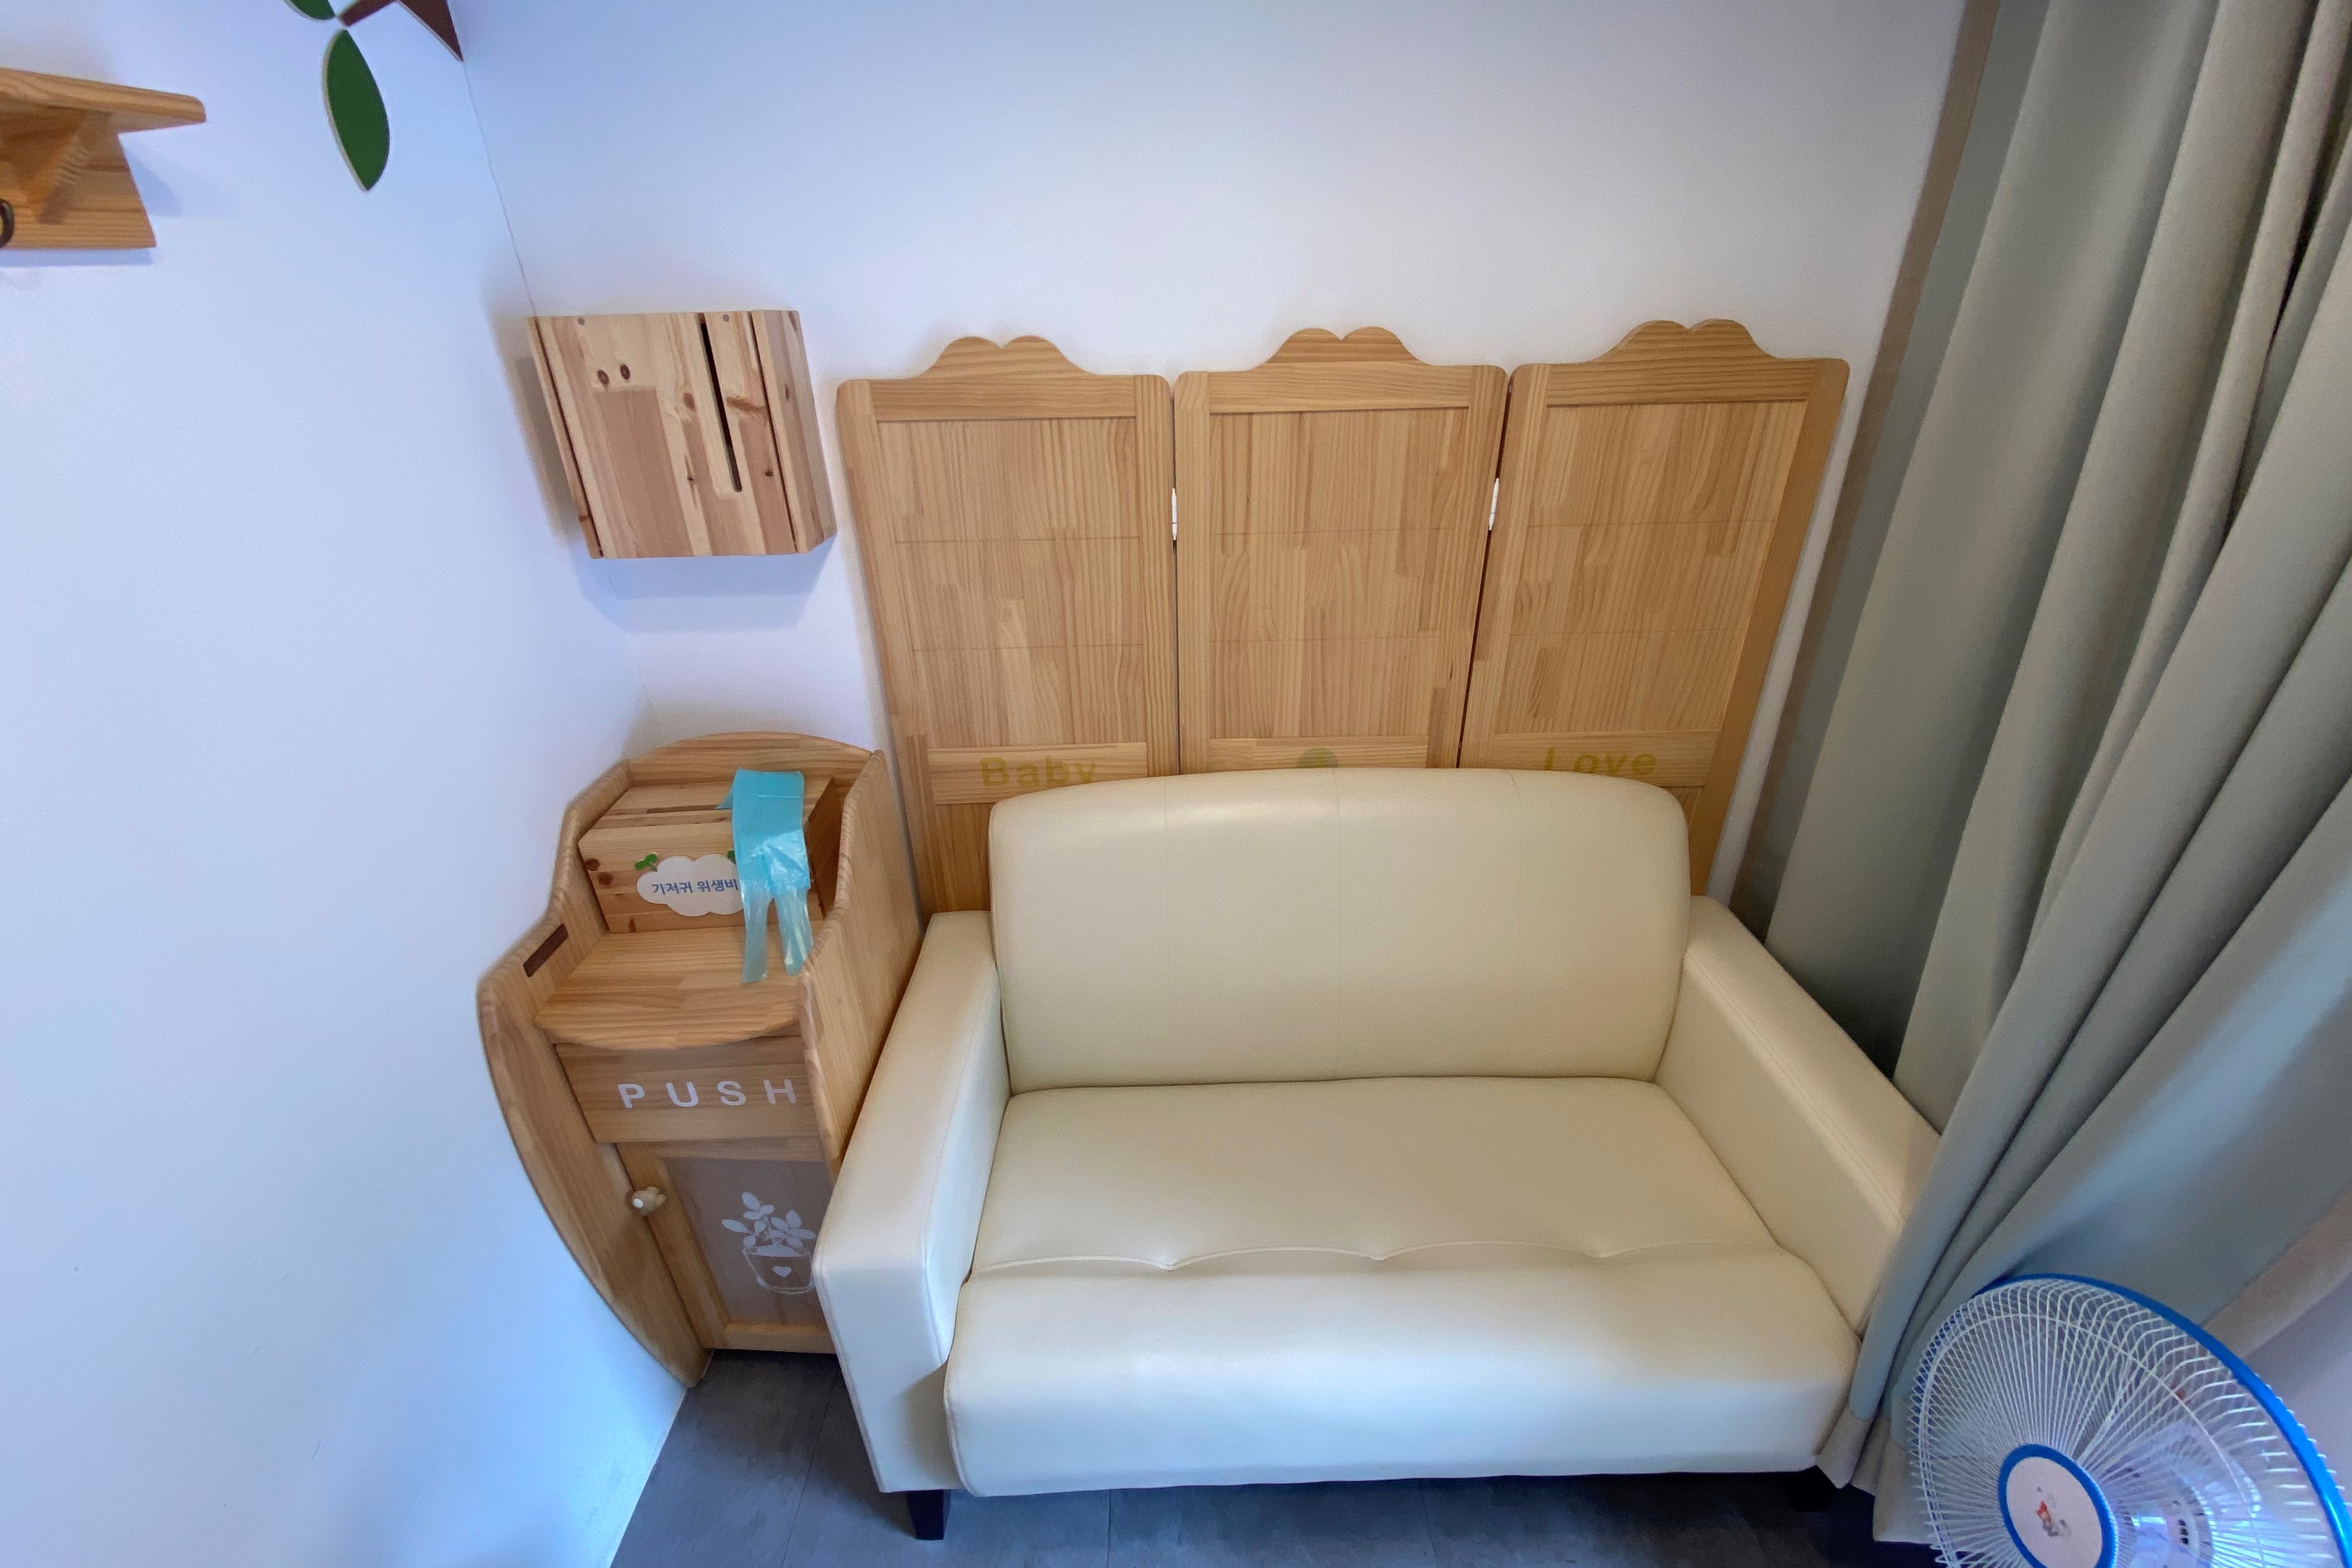 Facilities for pregnant women or families with children0 : Interior view of the nursing room in Nakseoungdae Park that gives cozy and warm sense of feeling 2